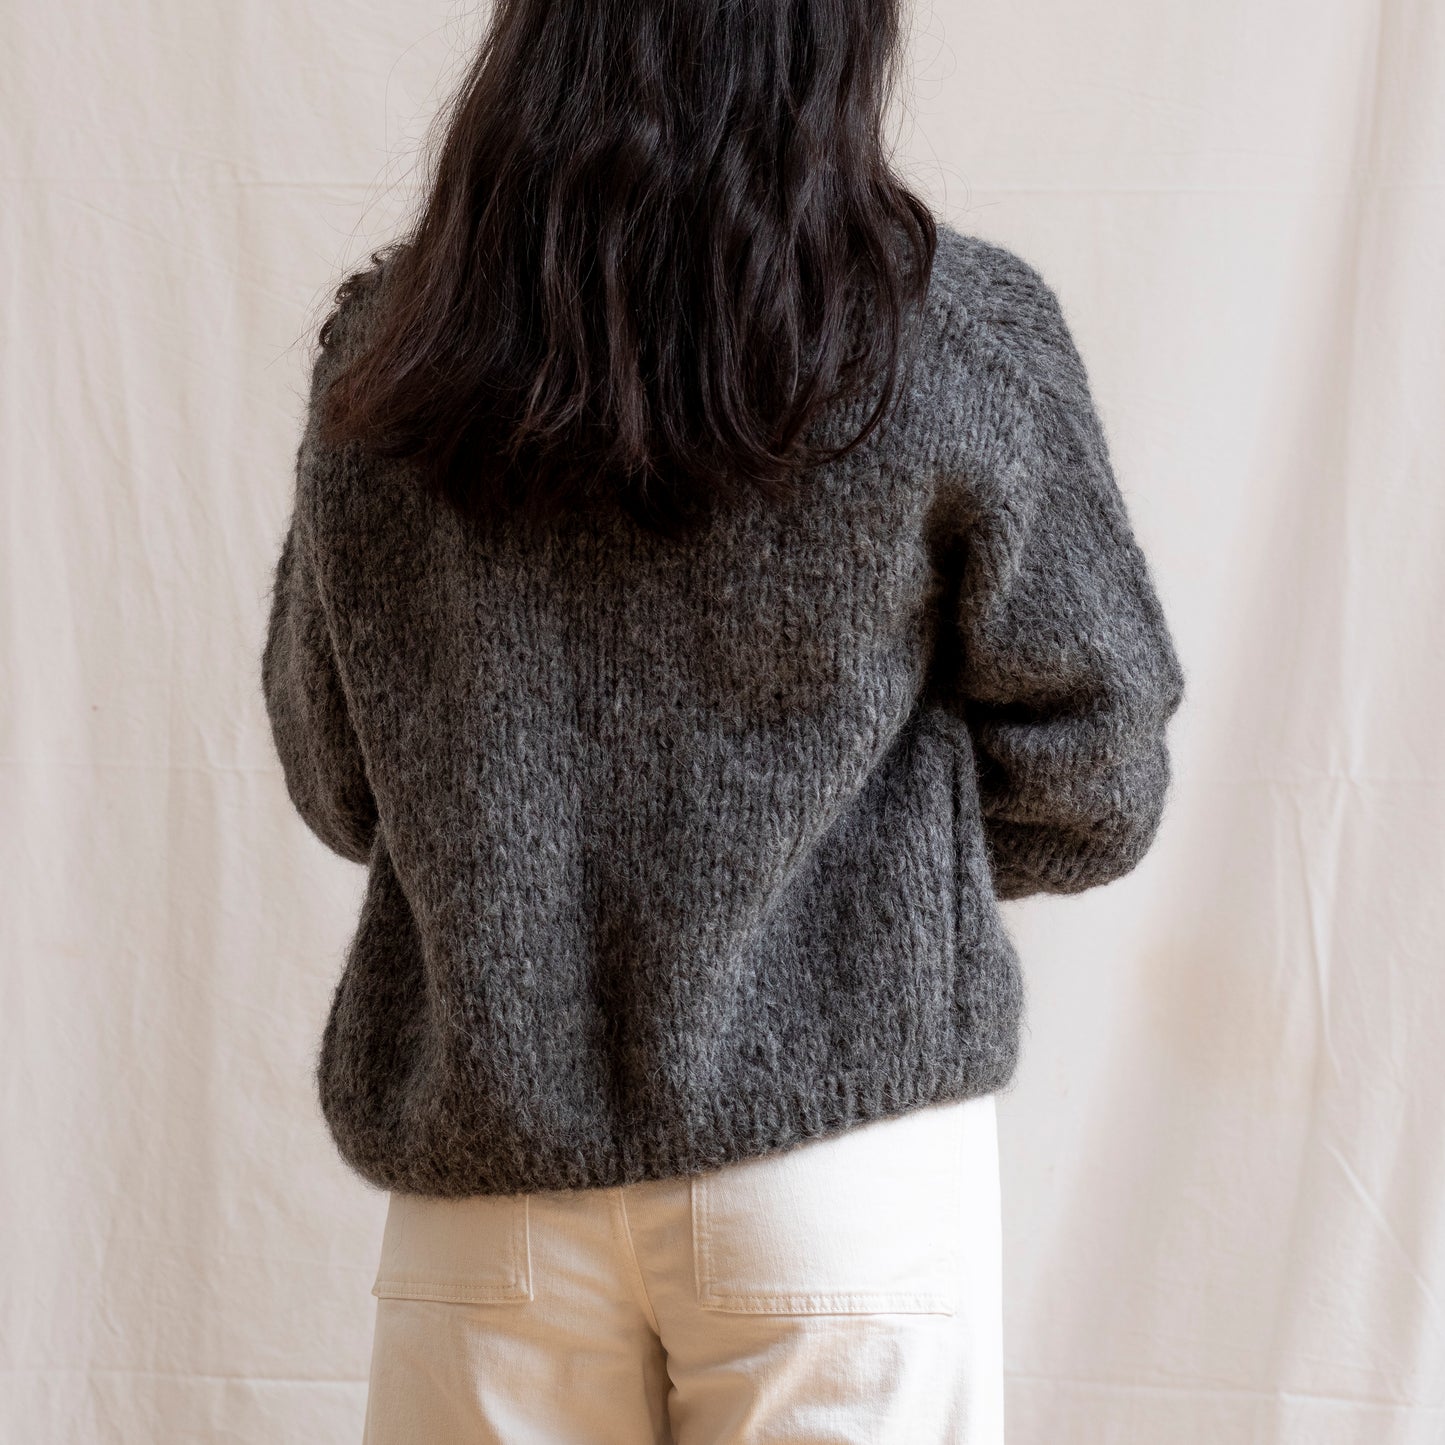 Woman wearing charcoal coloured knitted alpaca wool cardigan. Super-soft and cosy.